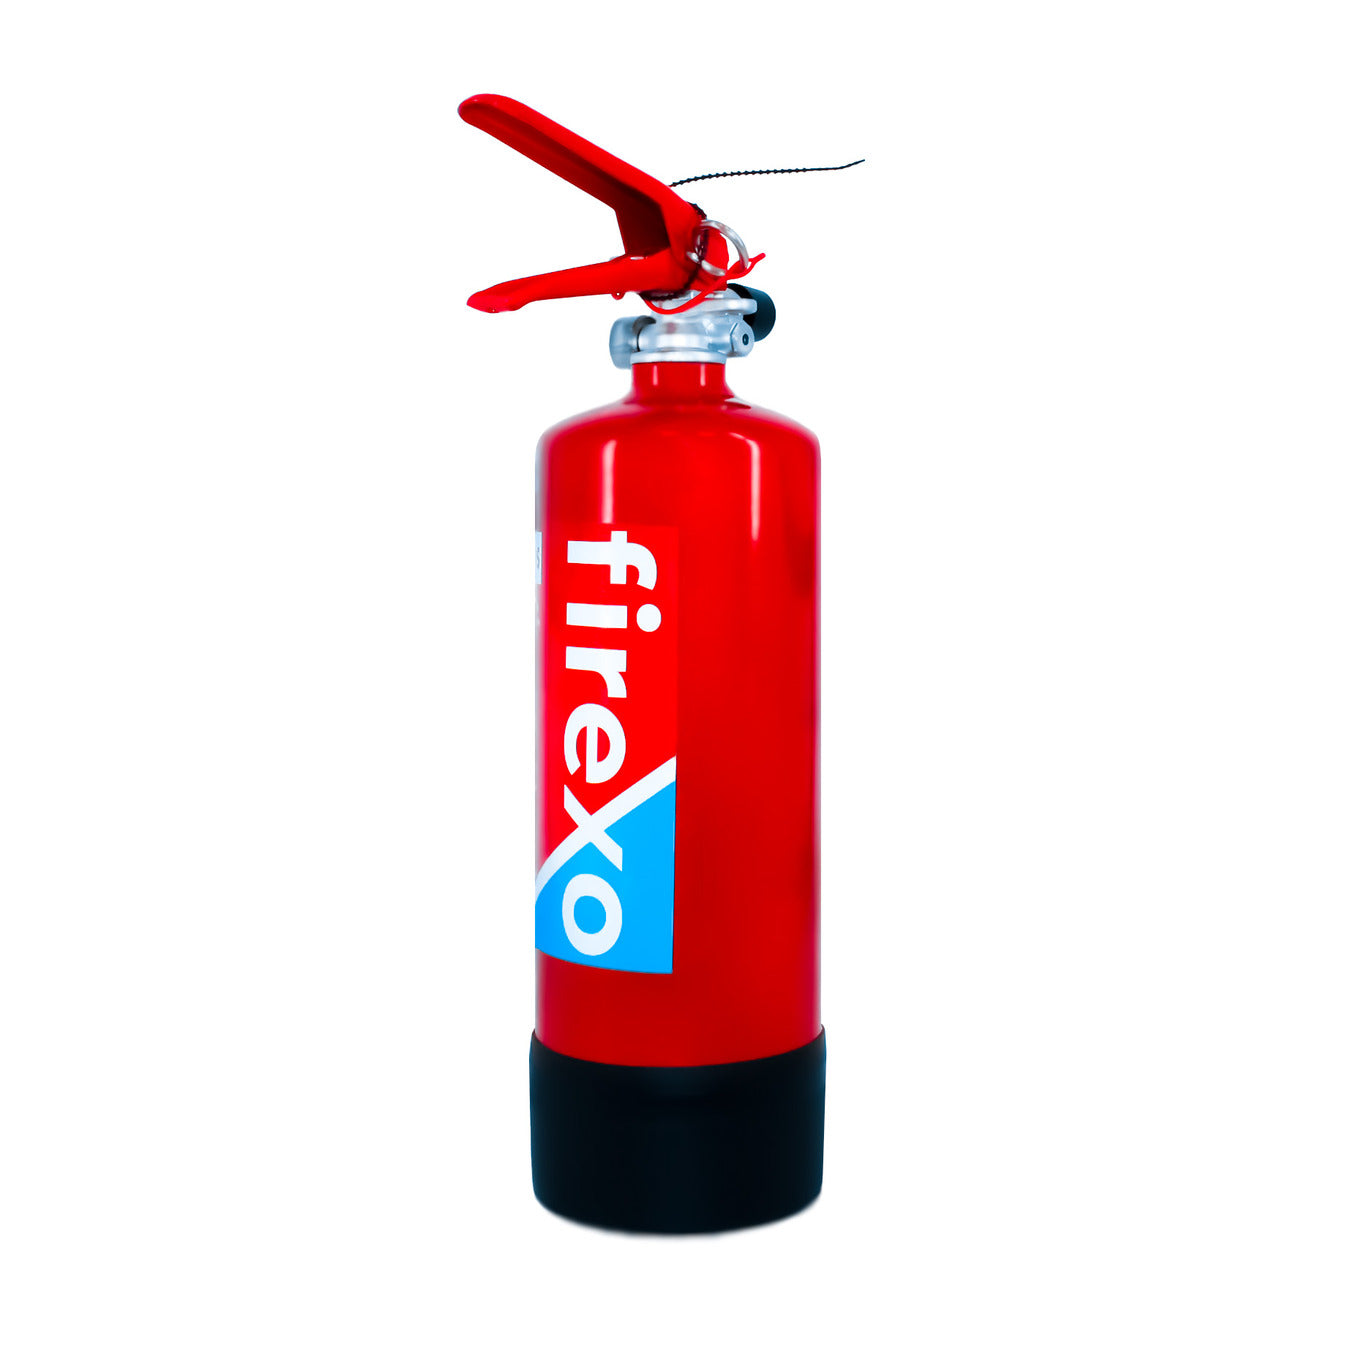 Firexo Boat Fire Extinguisher Set - 7 Items